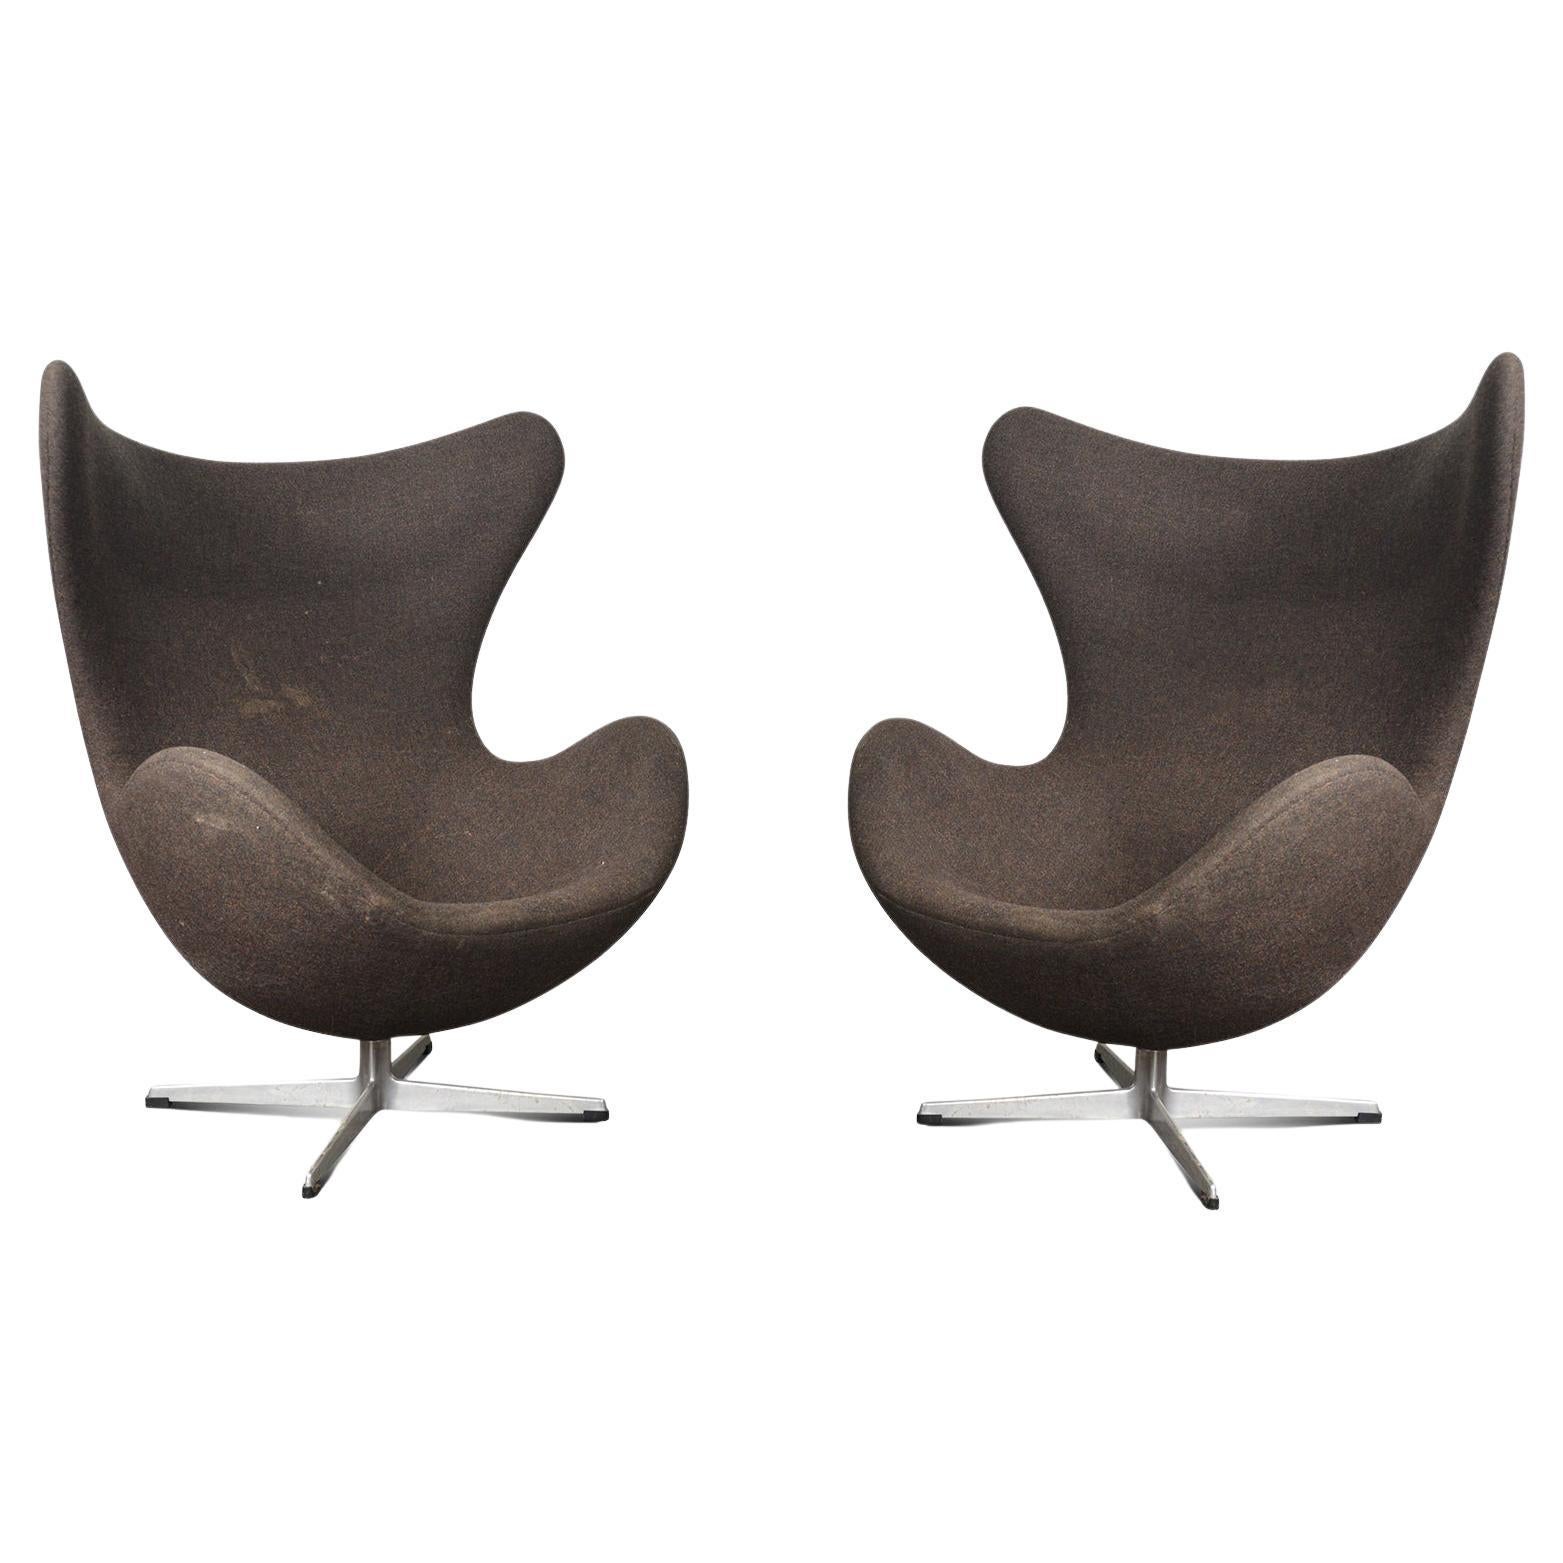 Pair of Original 1960s Arne Jacobsen Egg Chairs Including Upholstery For Sale